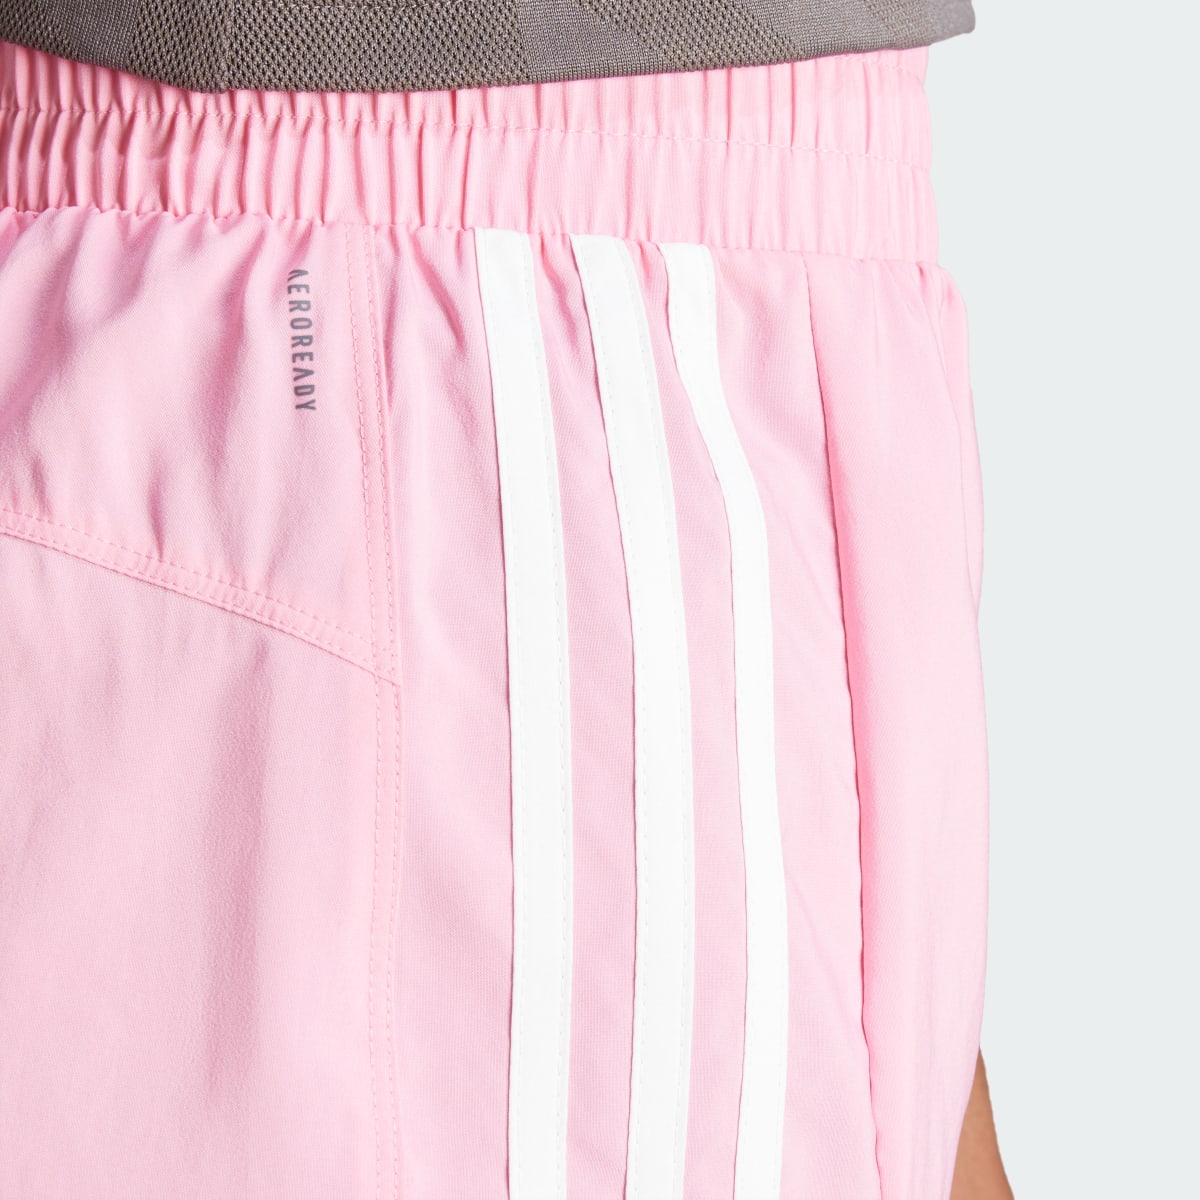 Adidas Pacer Training 3-Stripes Woven High-Rise Shorts. 6